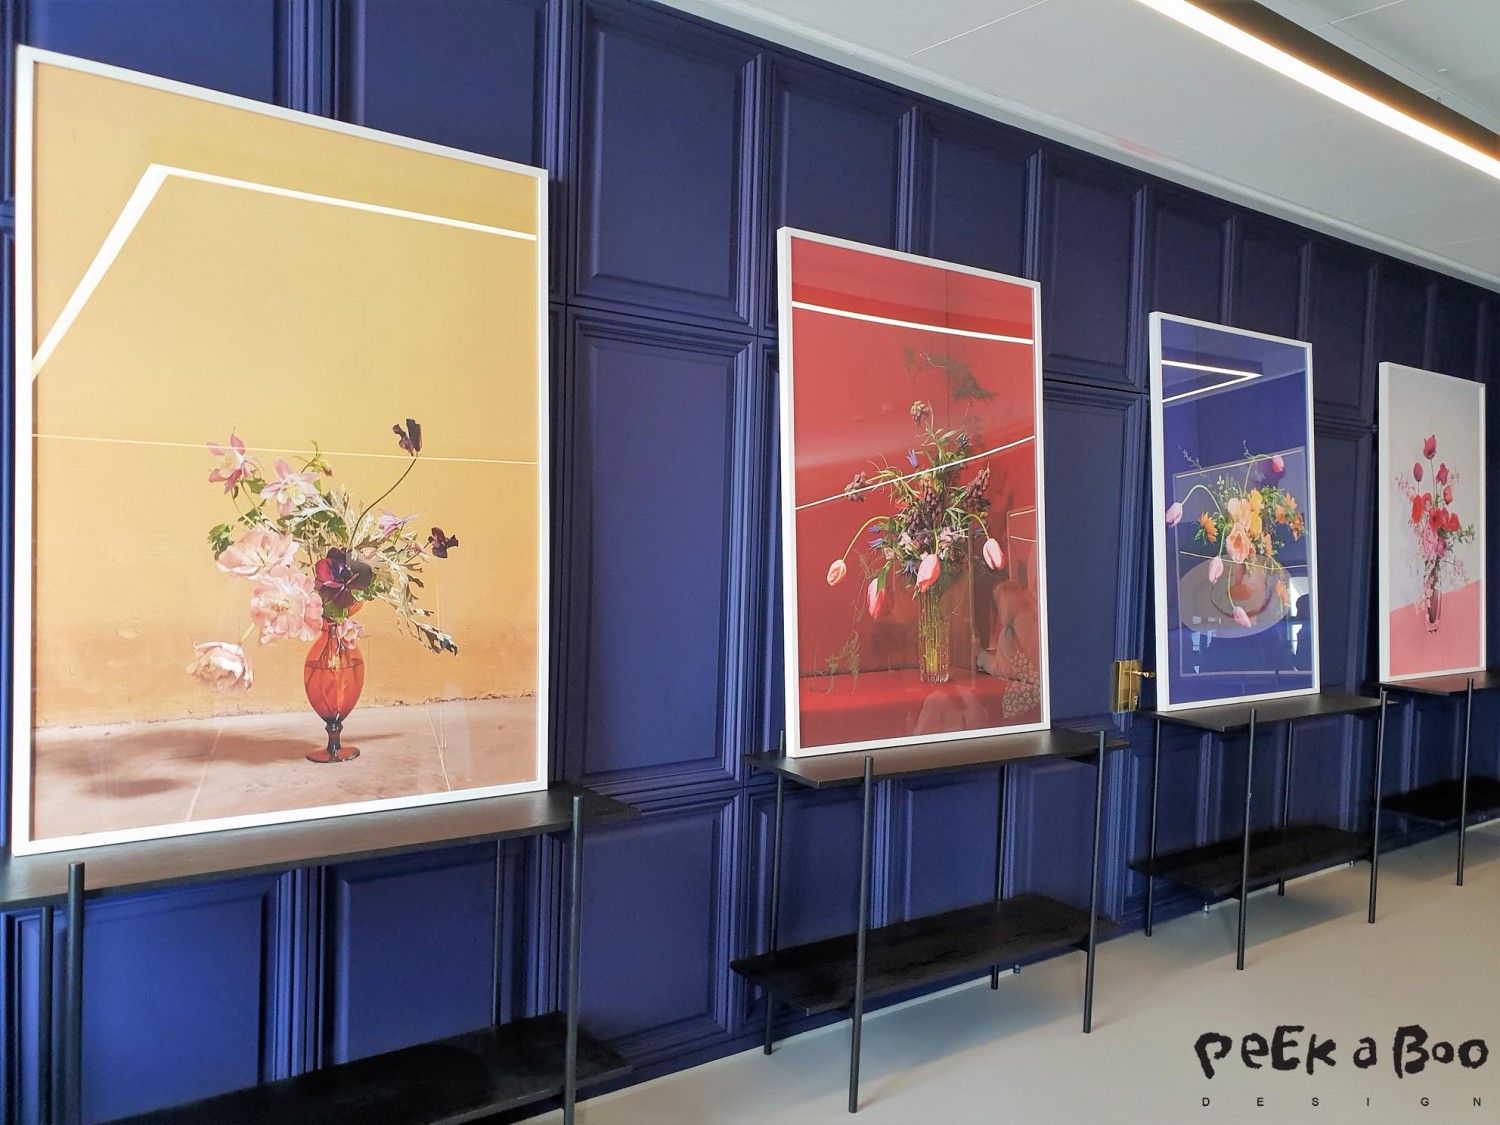 The flowerposters by Uffe Buchard x Paper collective shown during the fashion week.